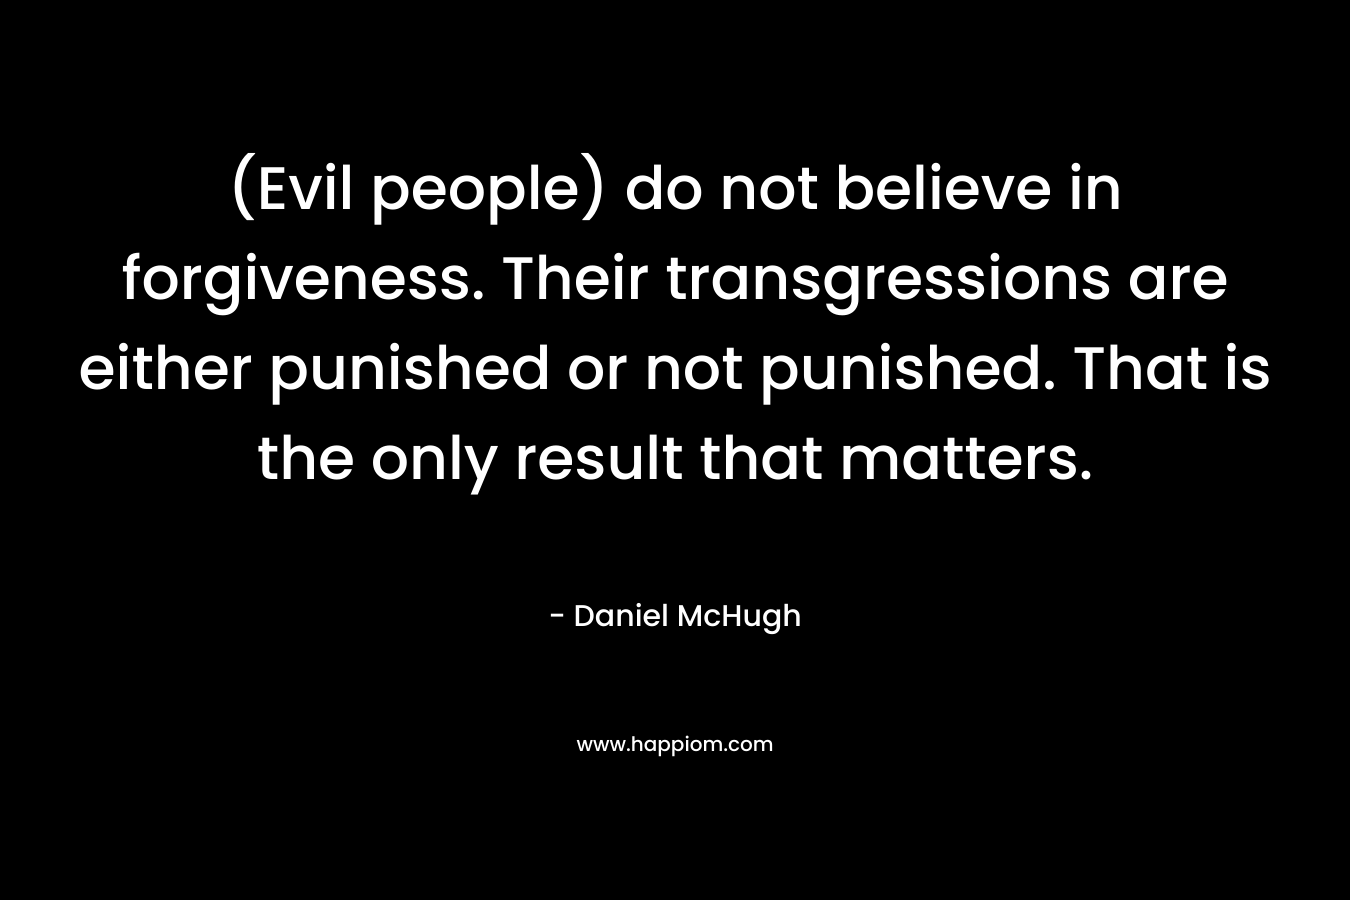 (Evil people) do not believe in forgiveness. Their transgressions are either punished or not punished. That is the only result that matters. – Daniel McHugh